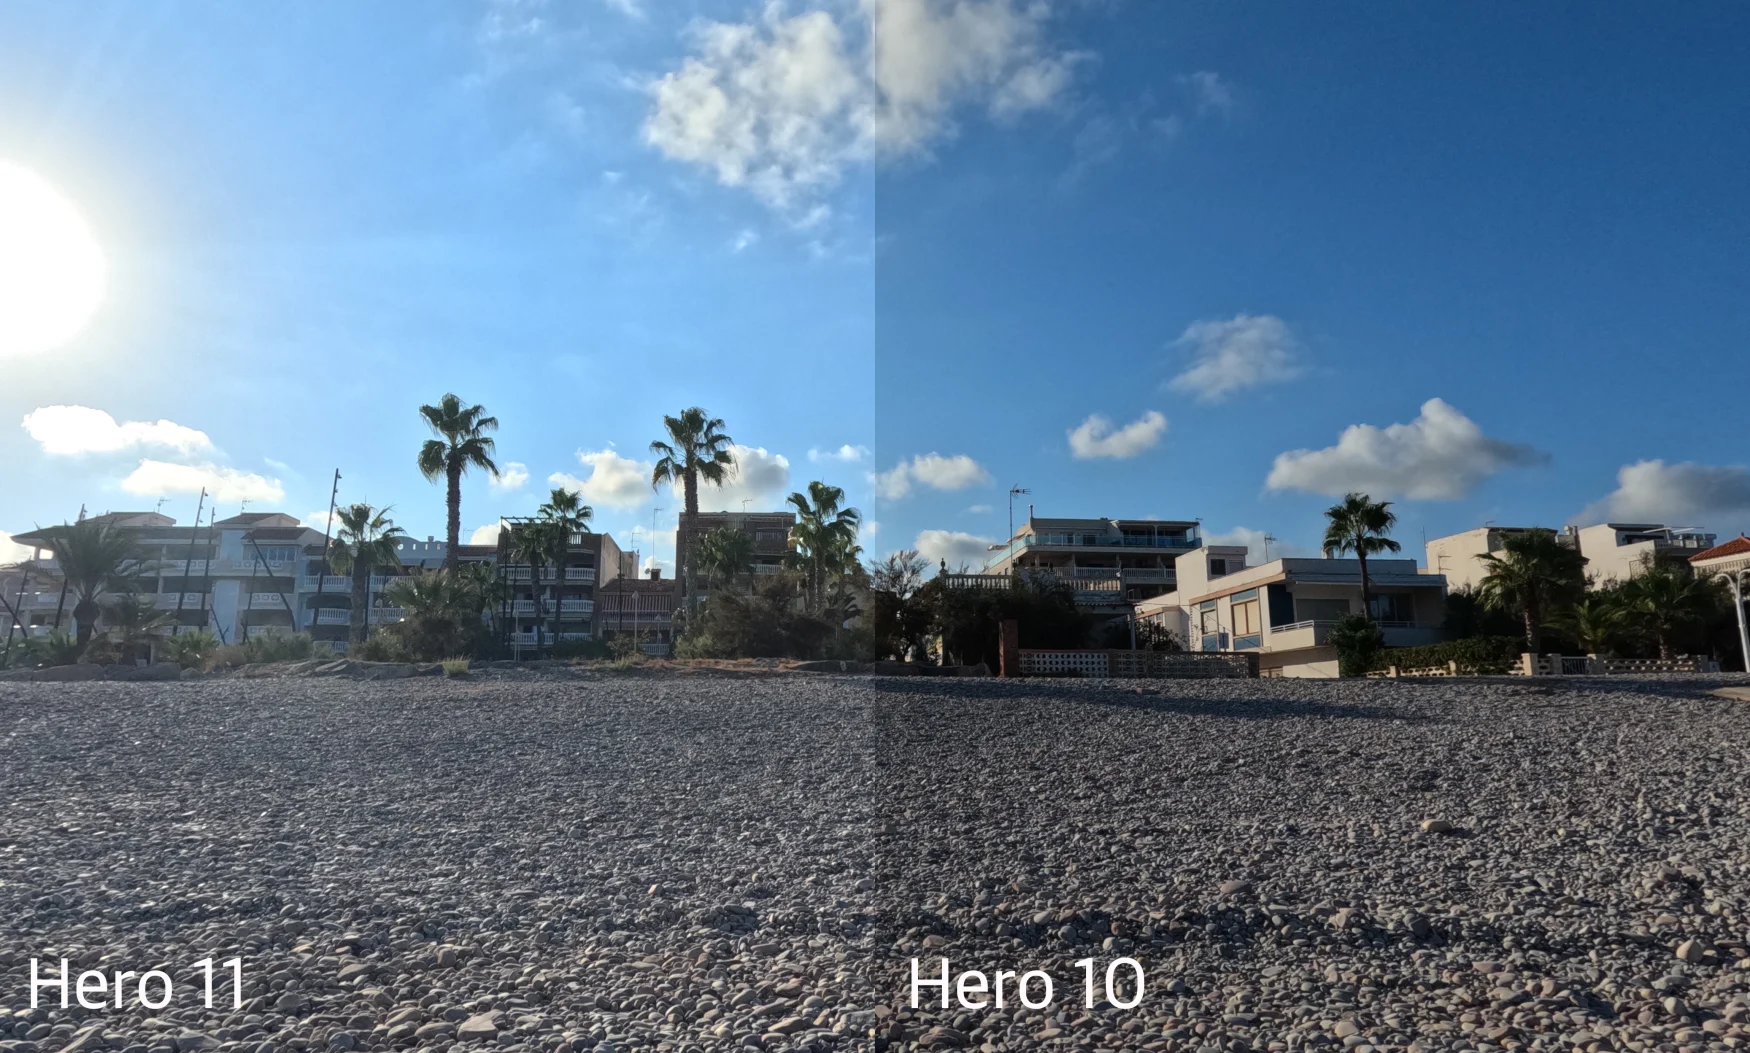 A comparison shot showing two photos side by side. One shot with the GoPro Hero 11 and the other the GoPro Hero 10